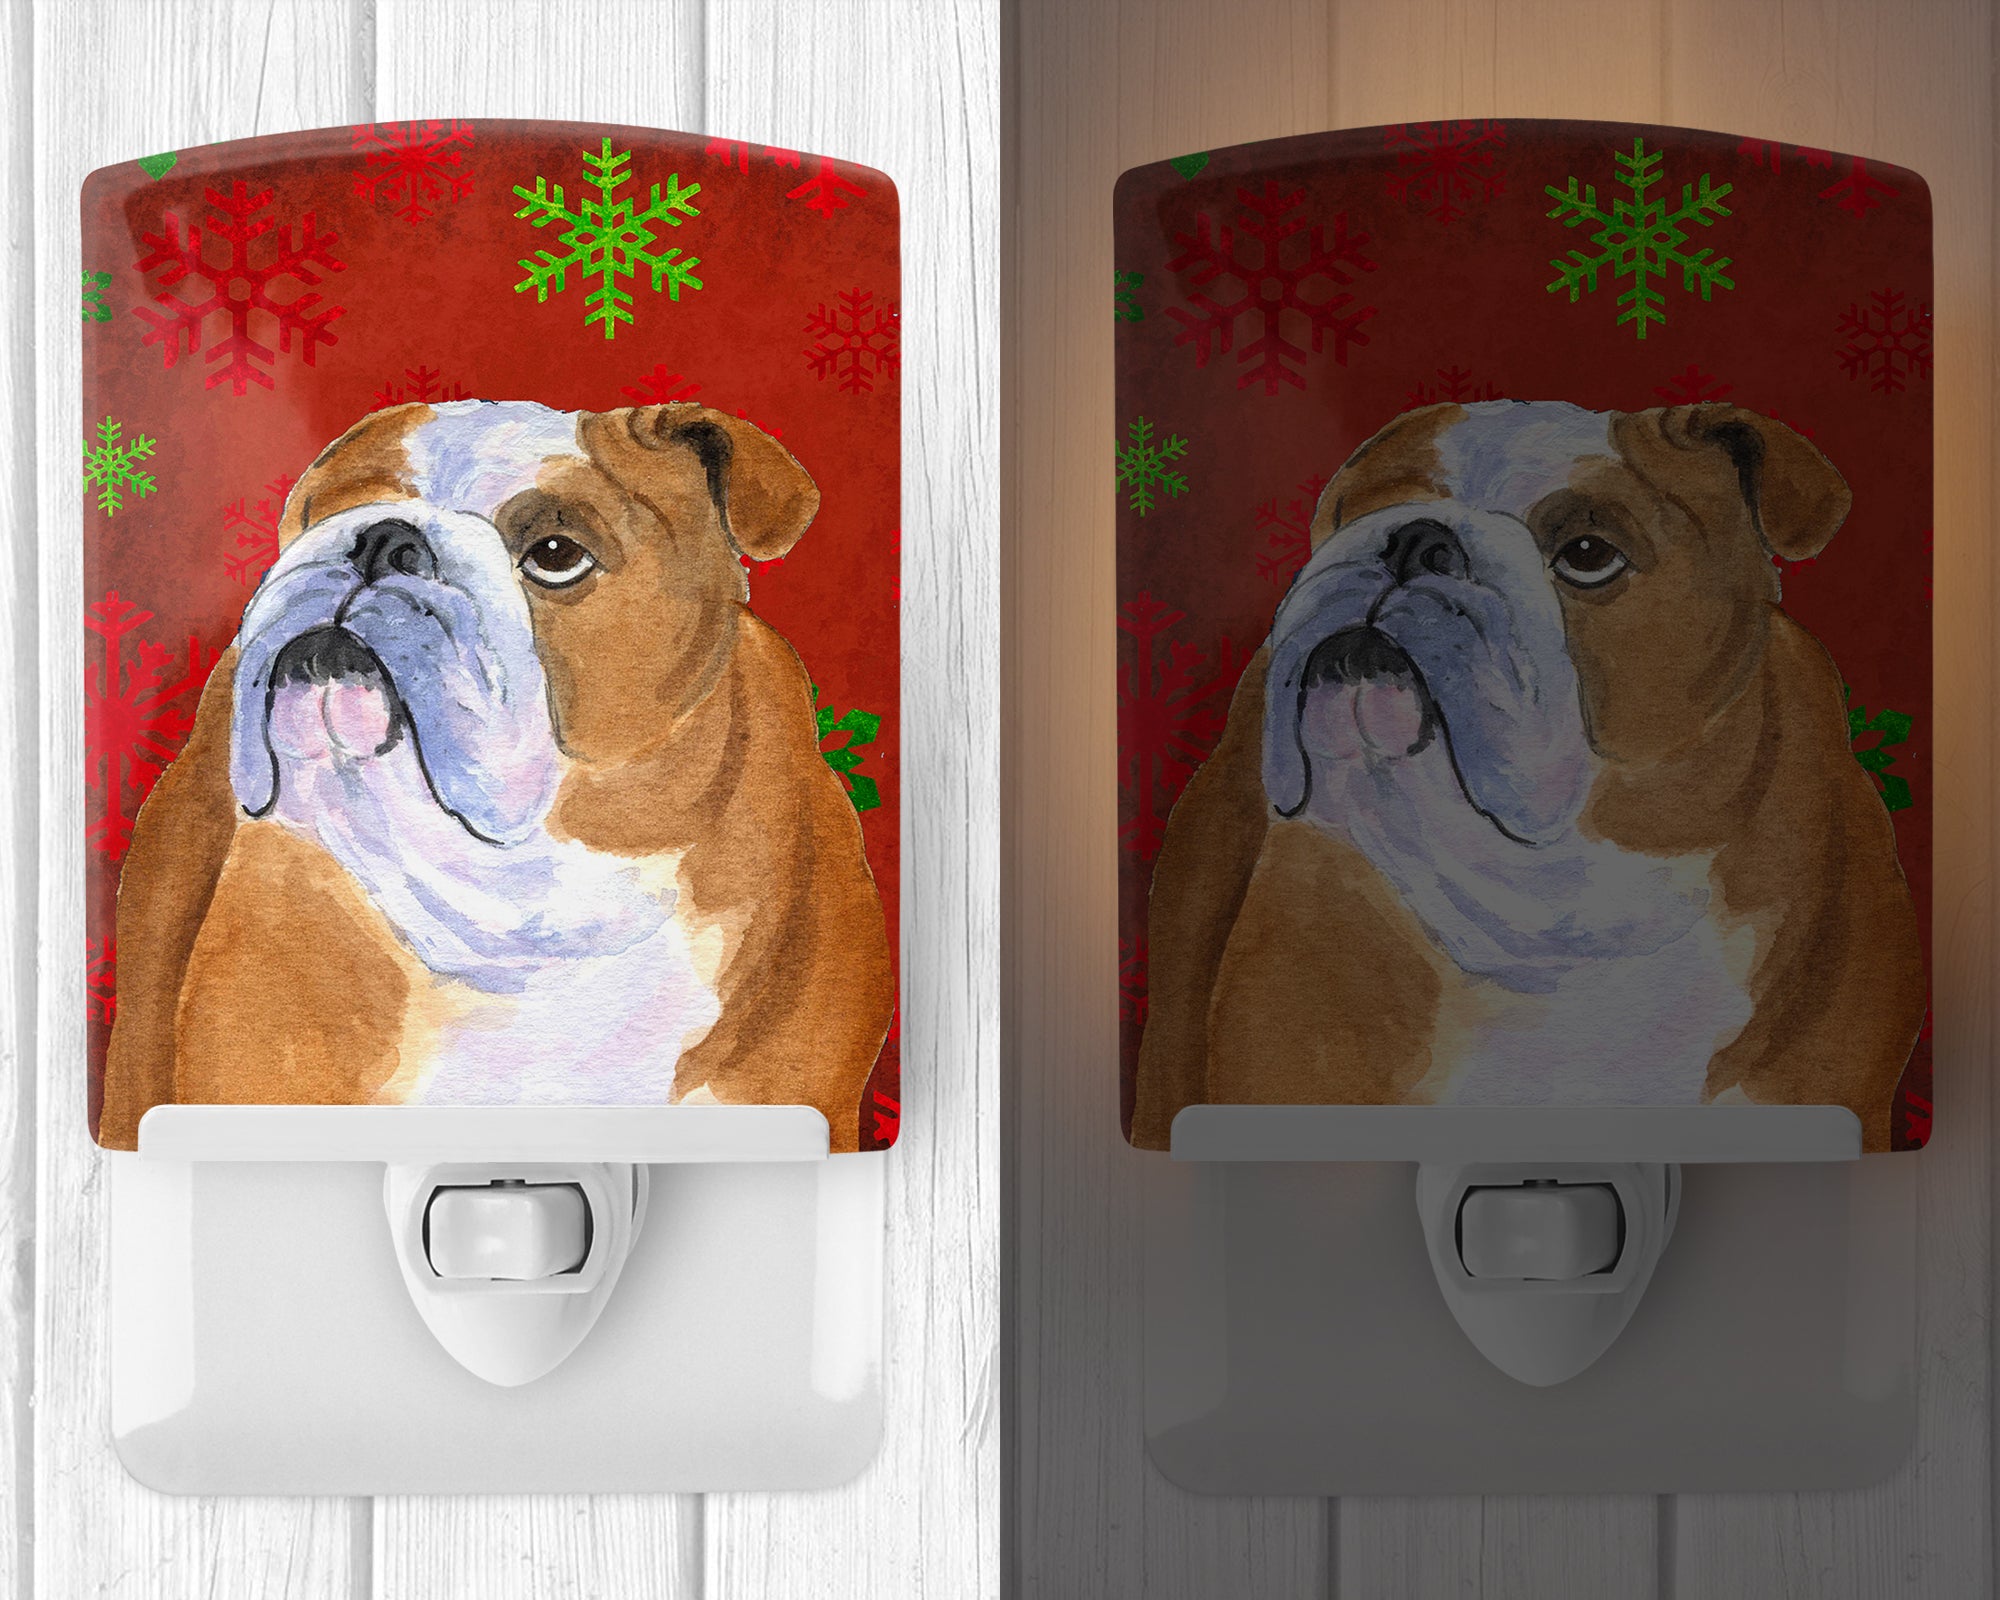 Bulldog English Red and Green Snowflakes Holiday Christmas Ceramic Night Light SS4698CNL - the-store.com